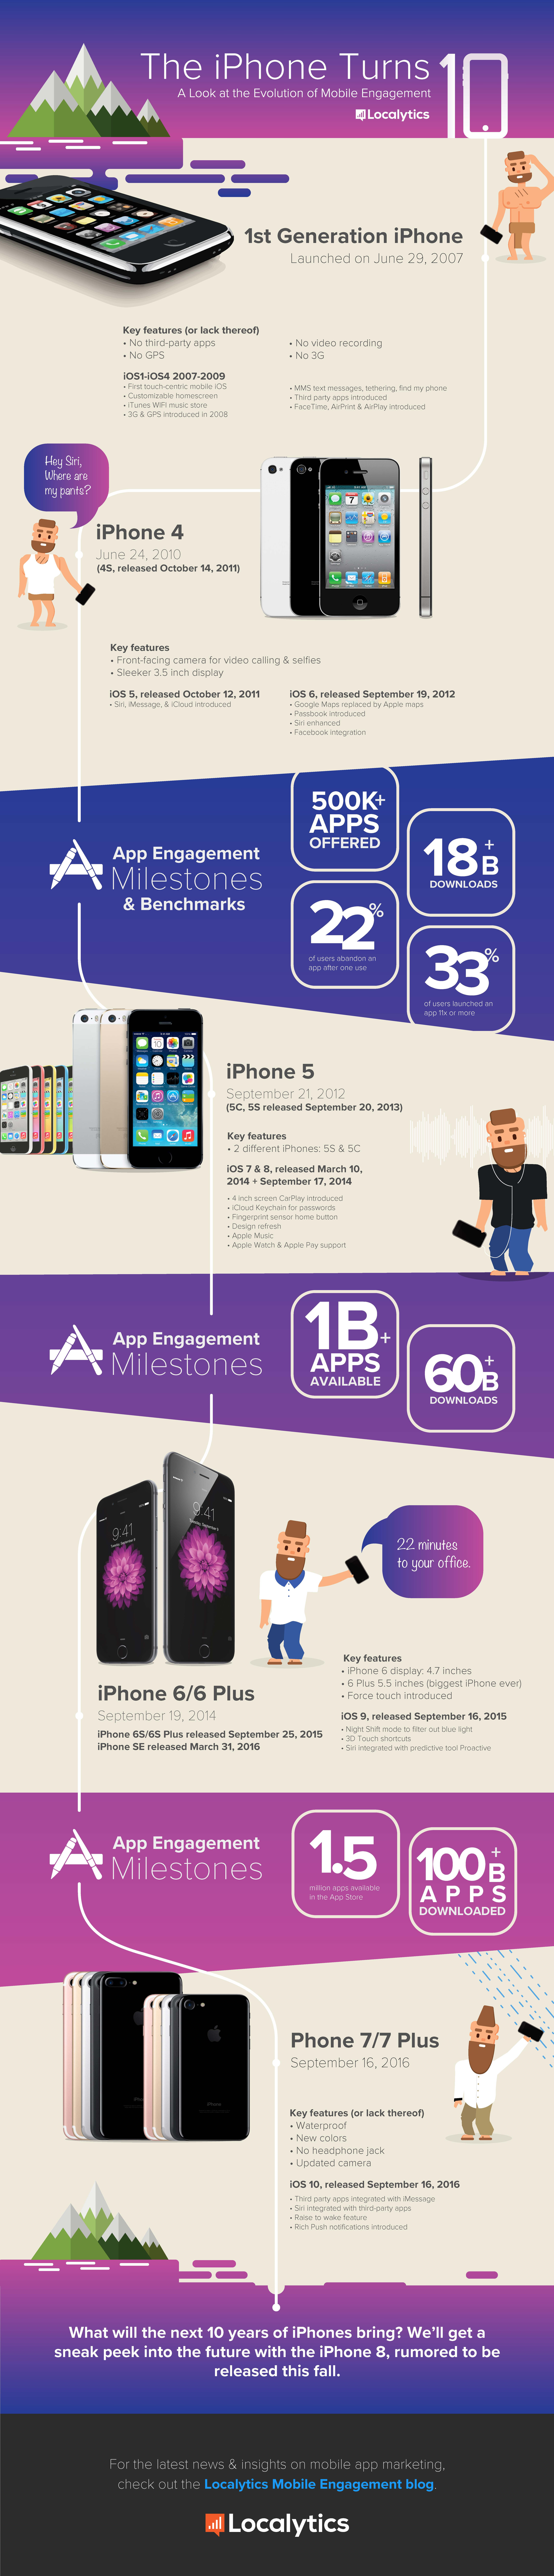 The iPhone Turns 10! How Mobile Engagement Has Evolved Since 2007 [Infographic]